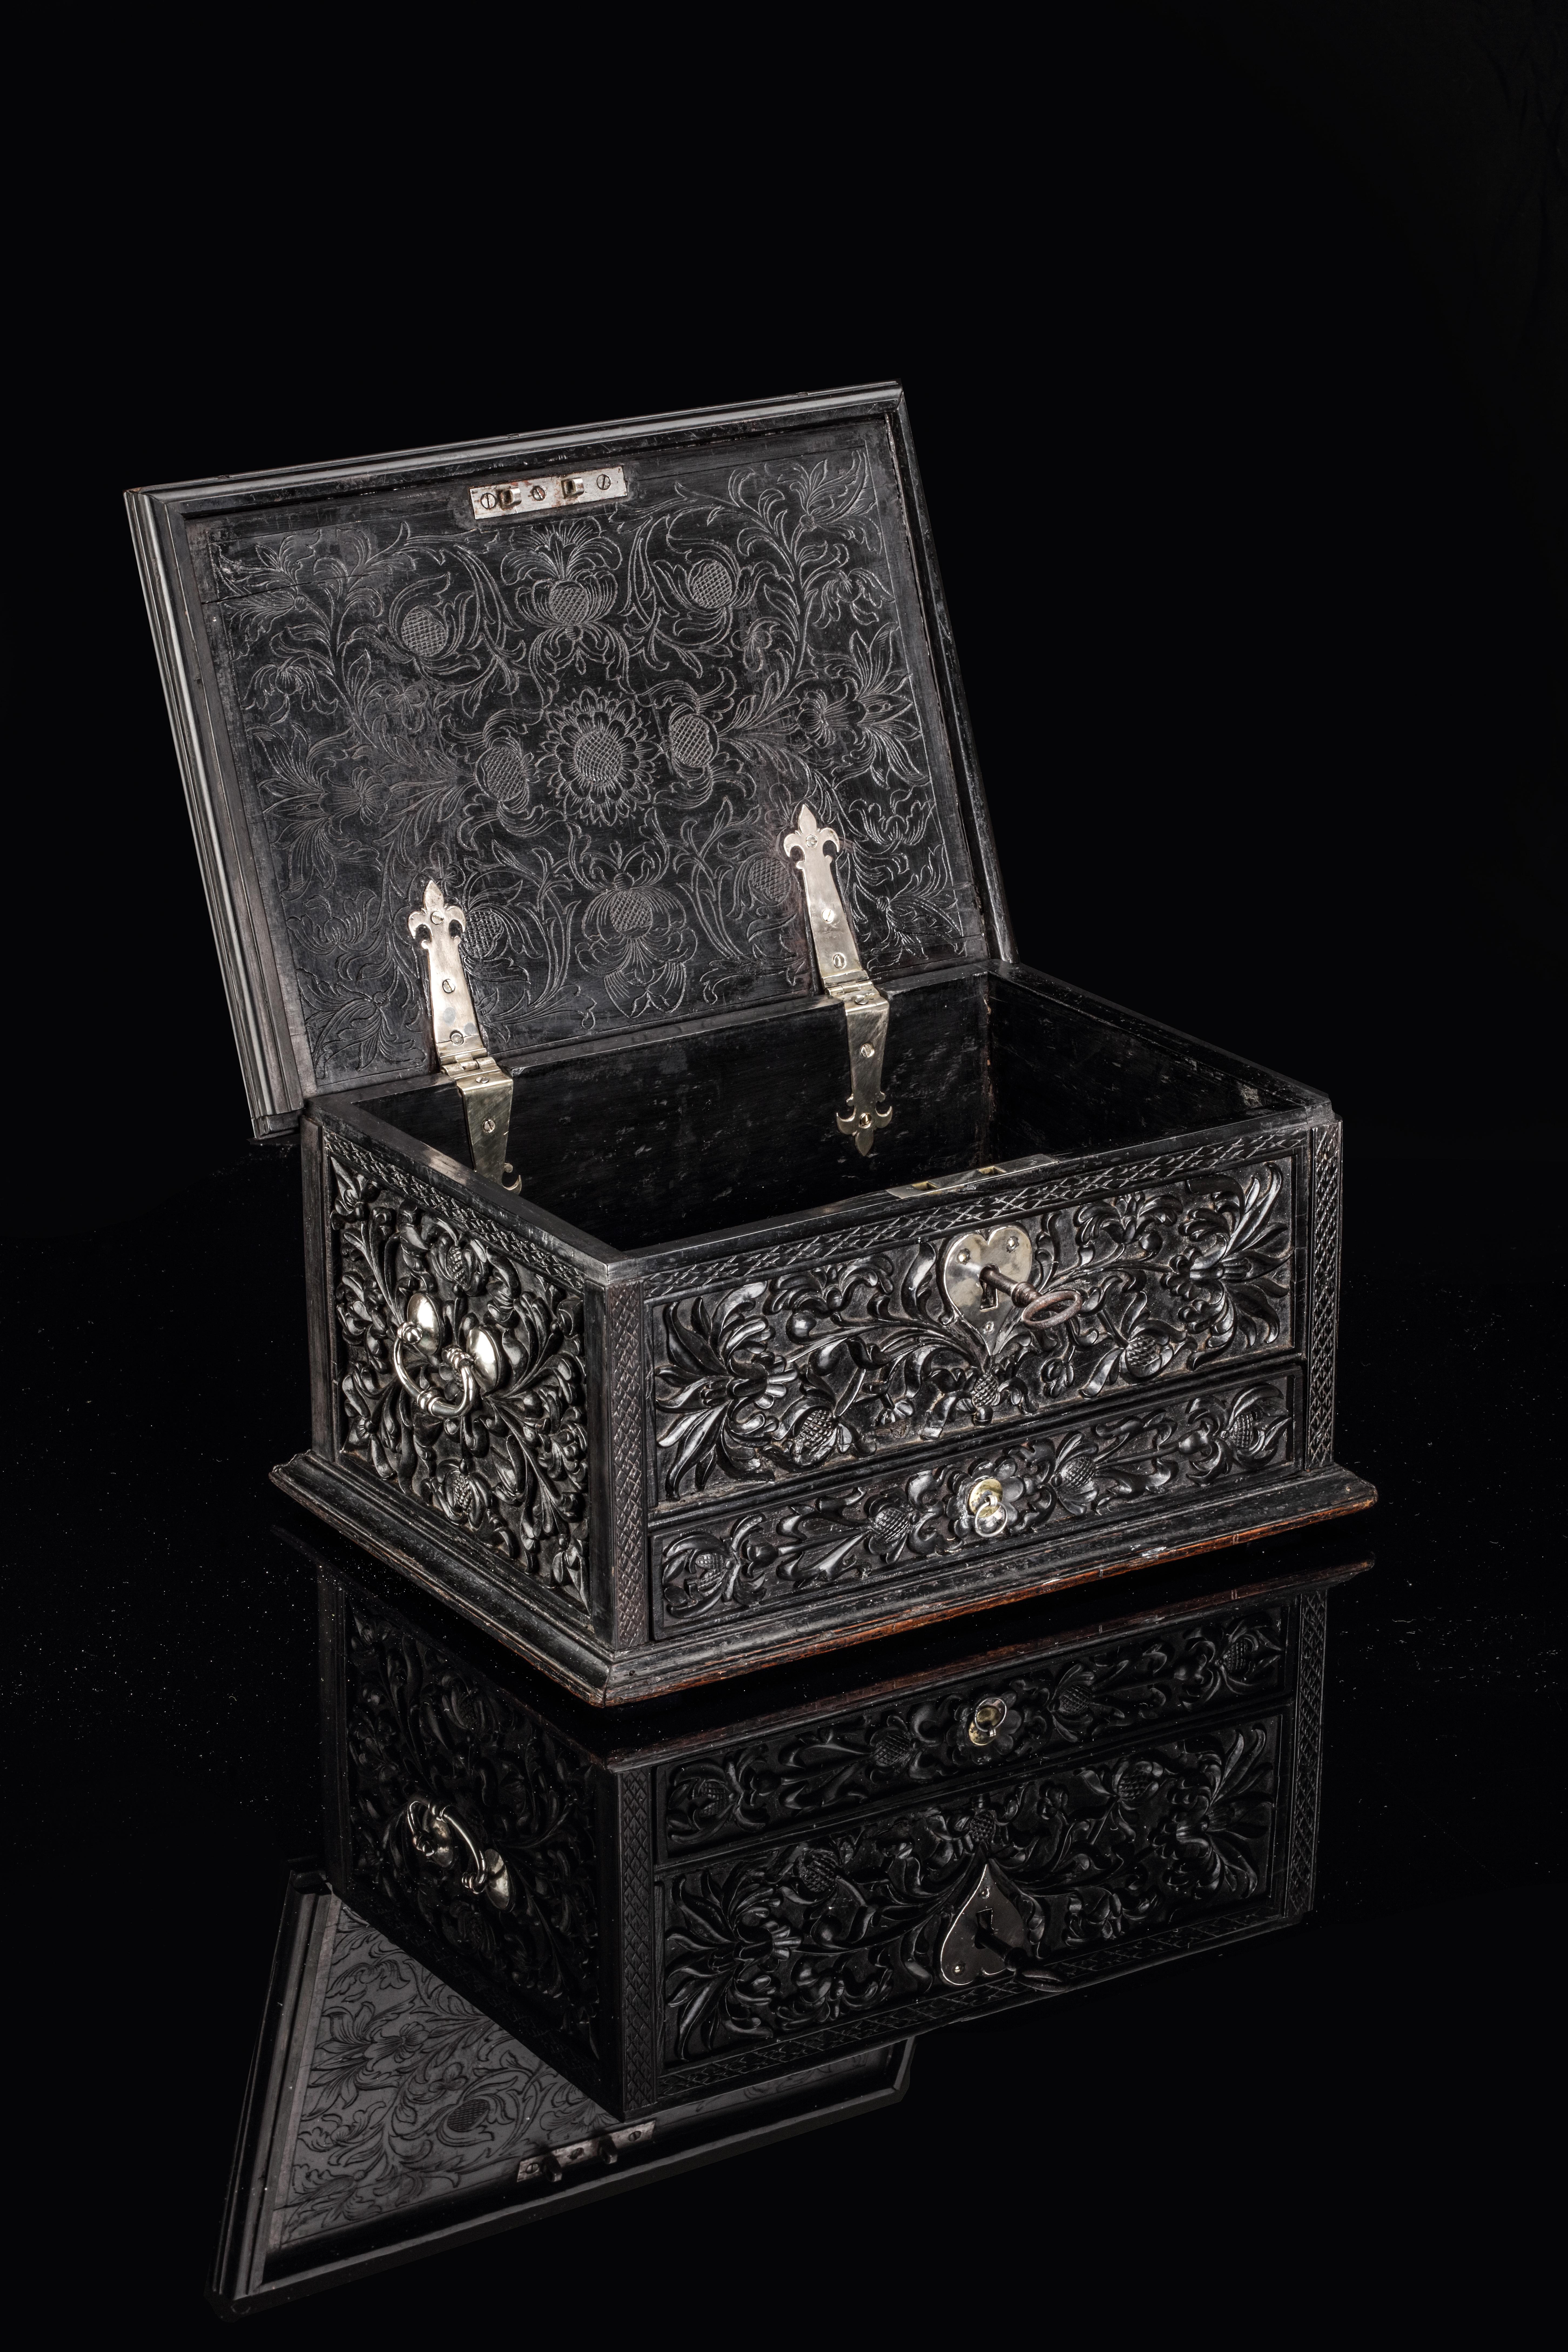 Batavia (Jakarta), or Sri Lanka, circa 1680-1720

The document or money box is densely carved with fine scrolling vines and lotus flowers. It has a charming heart- shapes silver lock-plate and compartments inside.

H. 18 x W. 31.5 x D. 23